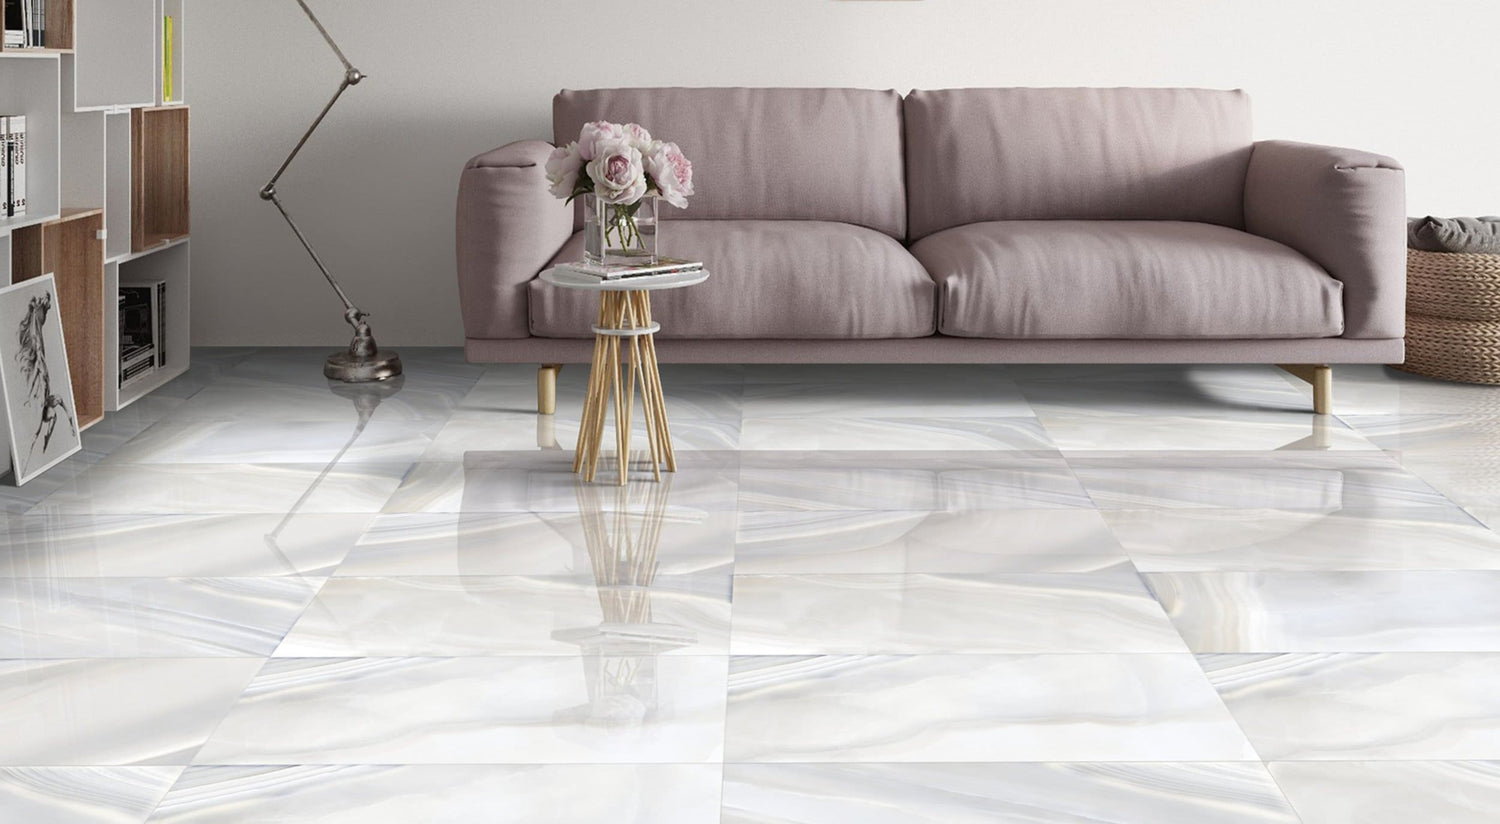 More About IMPERIAL MARBLE